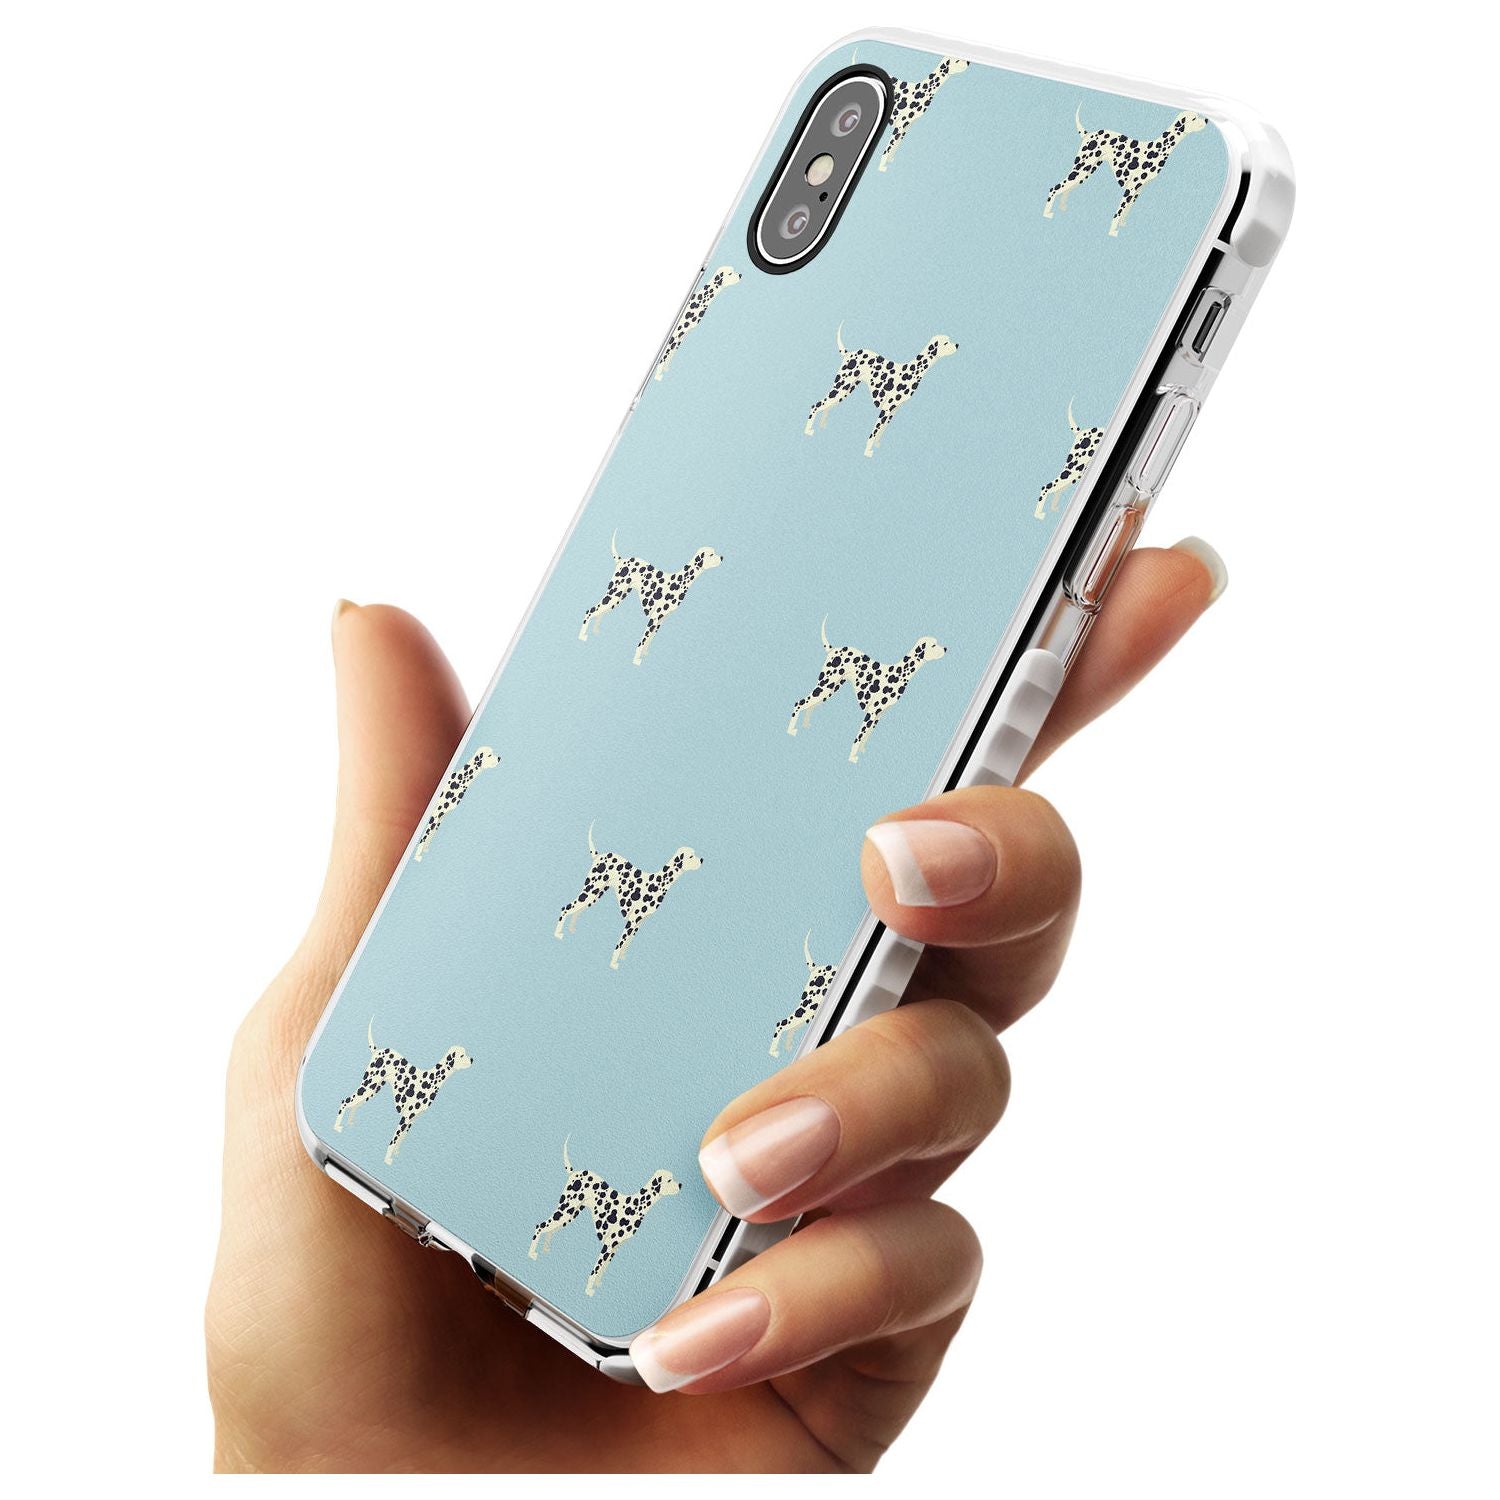 Dalmation Dog Pattern Impact Phone Case for iPhone X XS Max XR